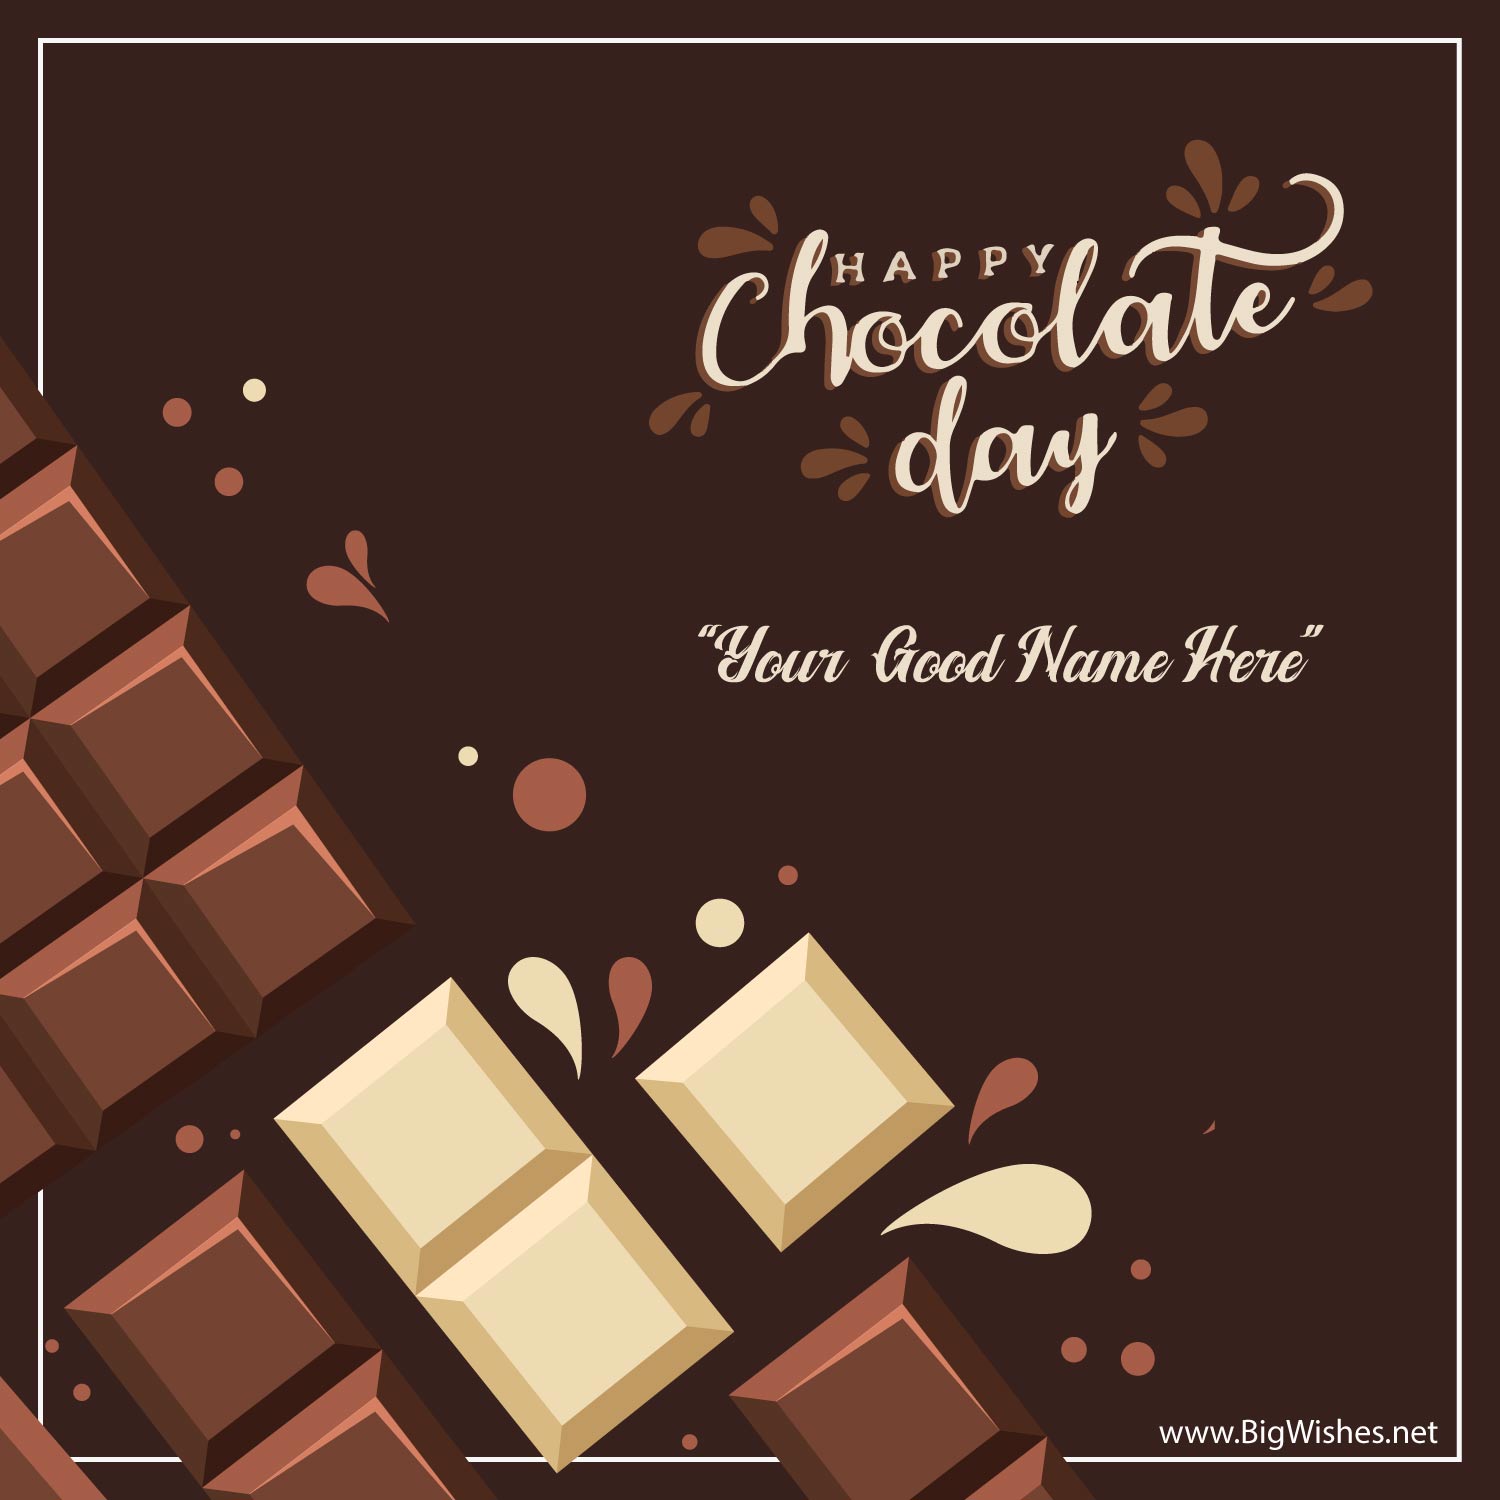 Happy Chocolate Day Wishes Image